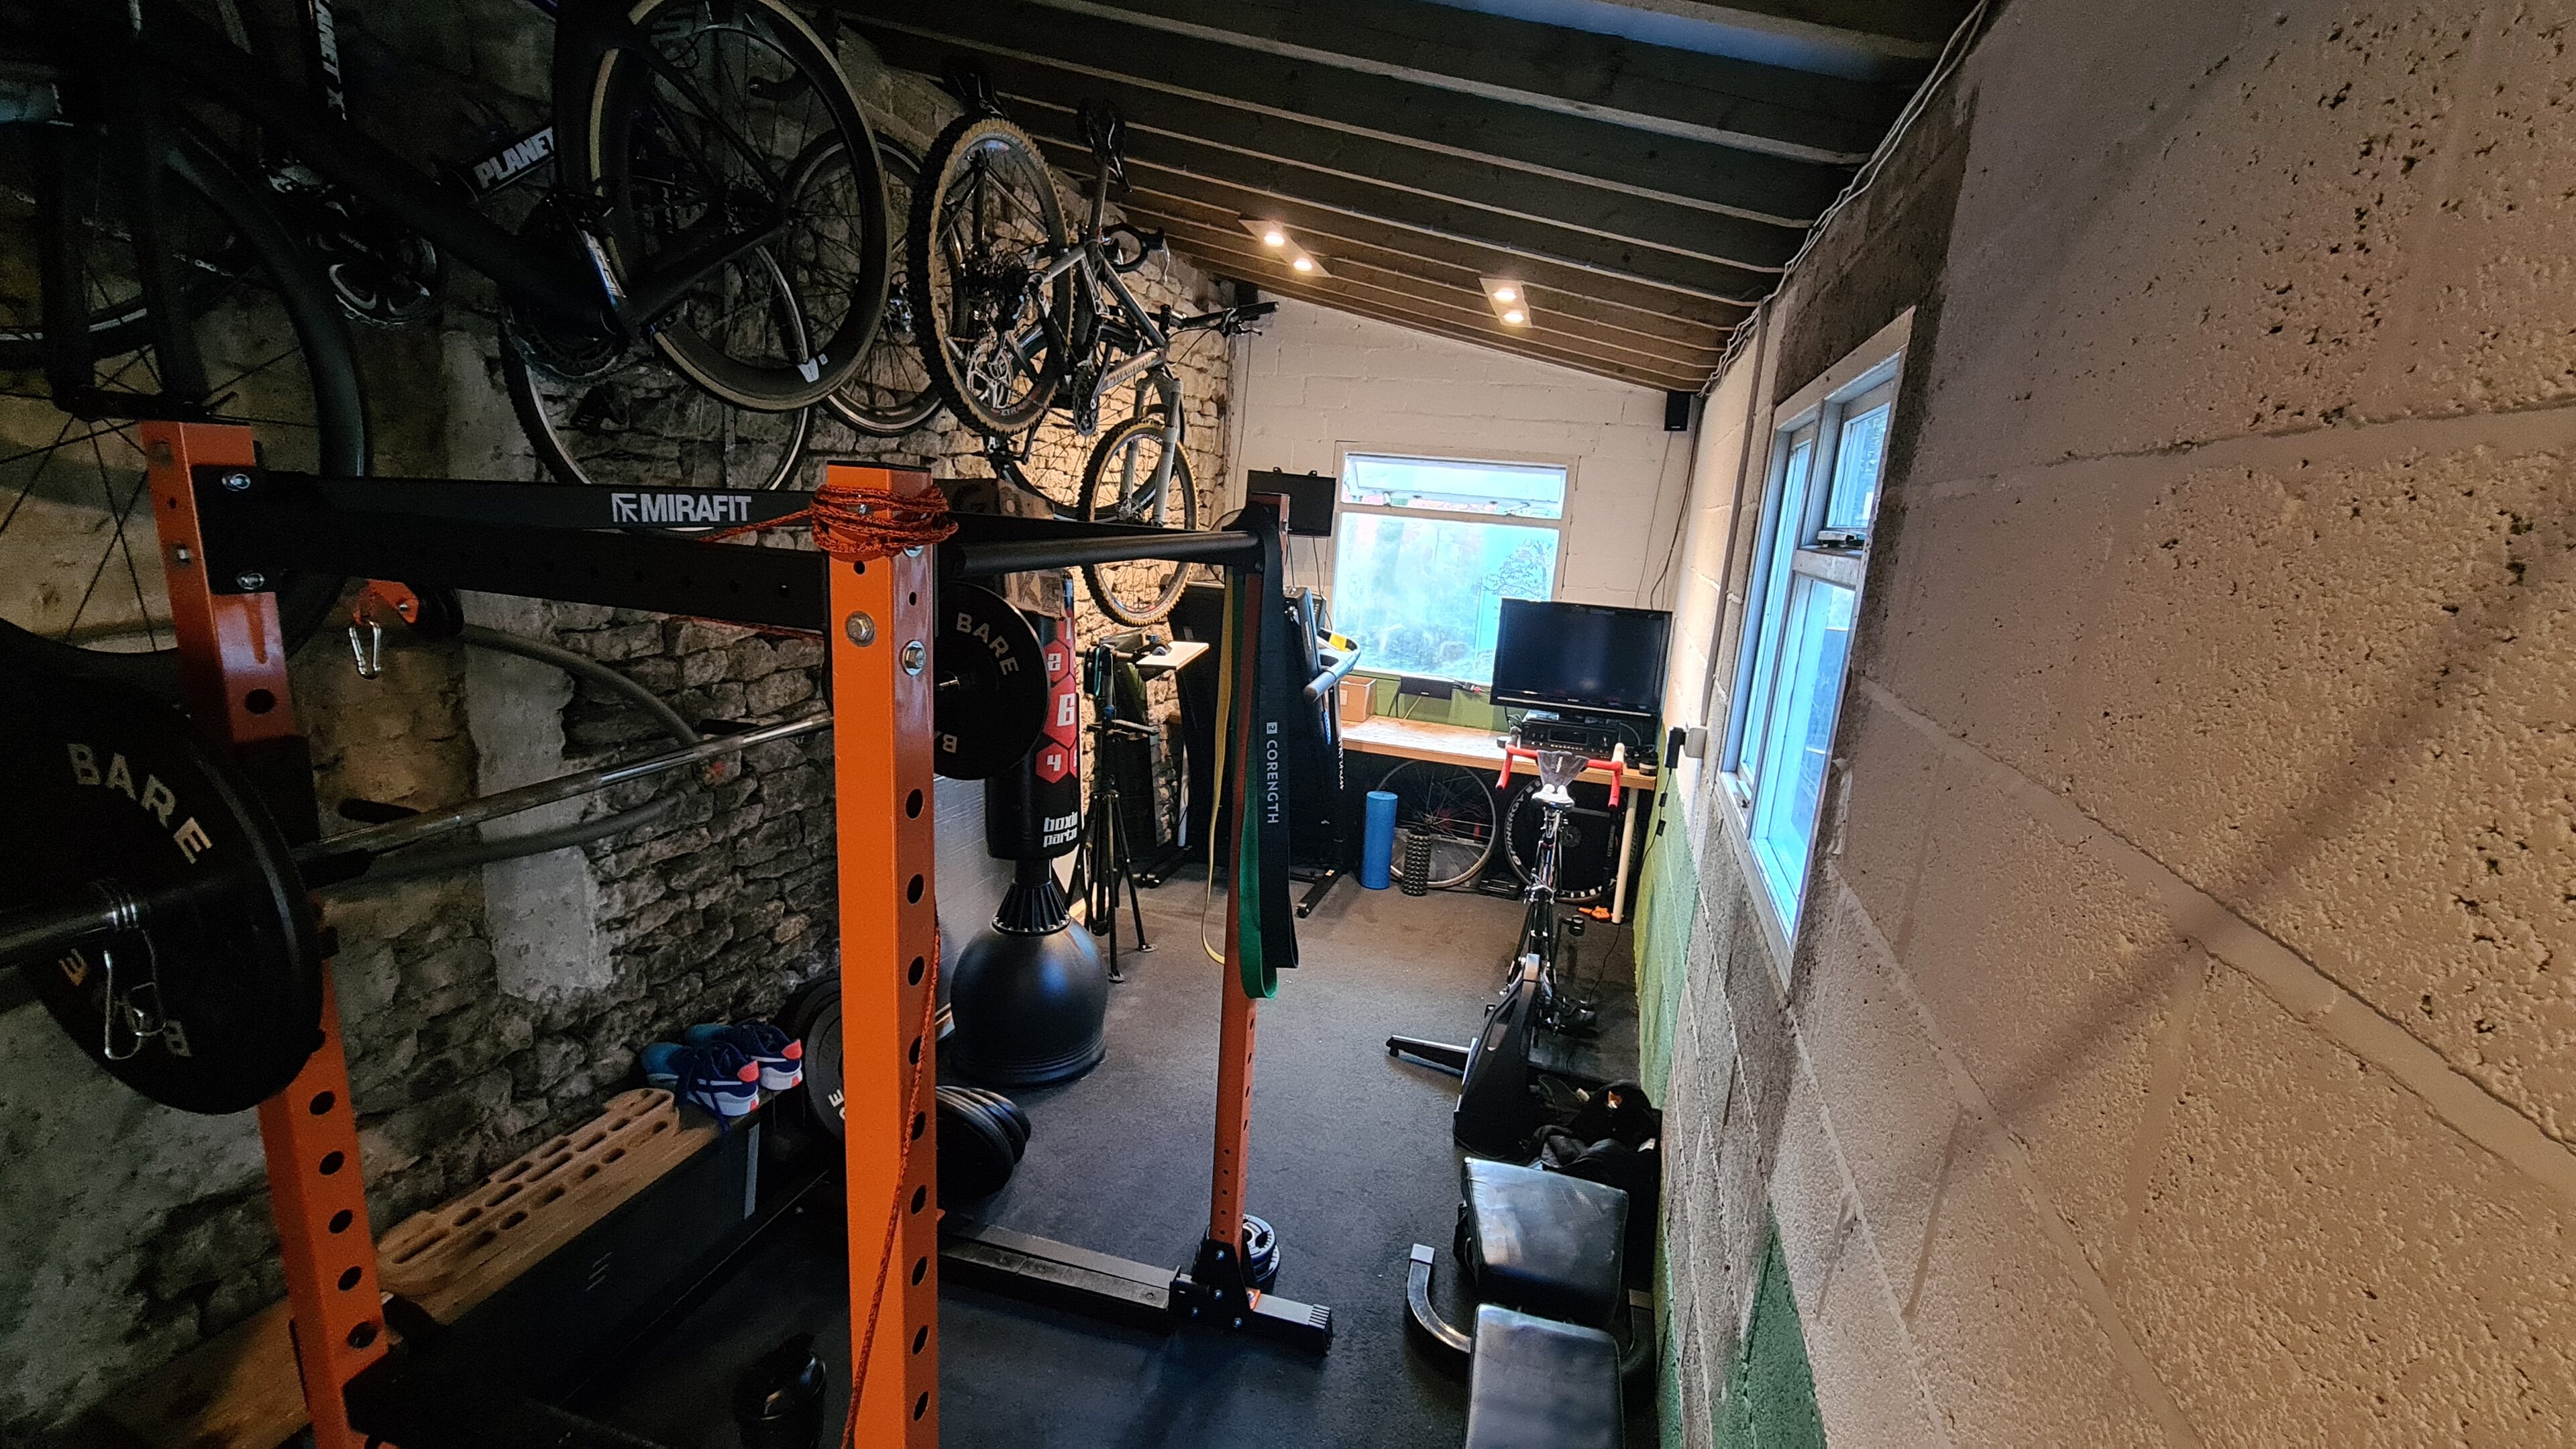 Pistonheads - The image shows a gym setting, likely for weightlifting or CrossFit. There is equipment visible, including several Olympic rings and dumbbells. A bicycle hangs from the ceiling, indicating a possible bike parking area within the gym. The room has a rustic feel with stone walls, and there's a window in one of the walls, letting in natural light. The overall atmosphere appears to be well-lit and organized for physical fitness activities.